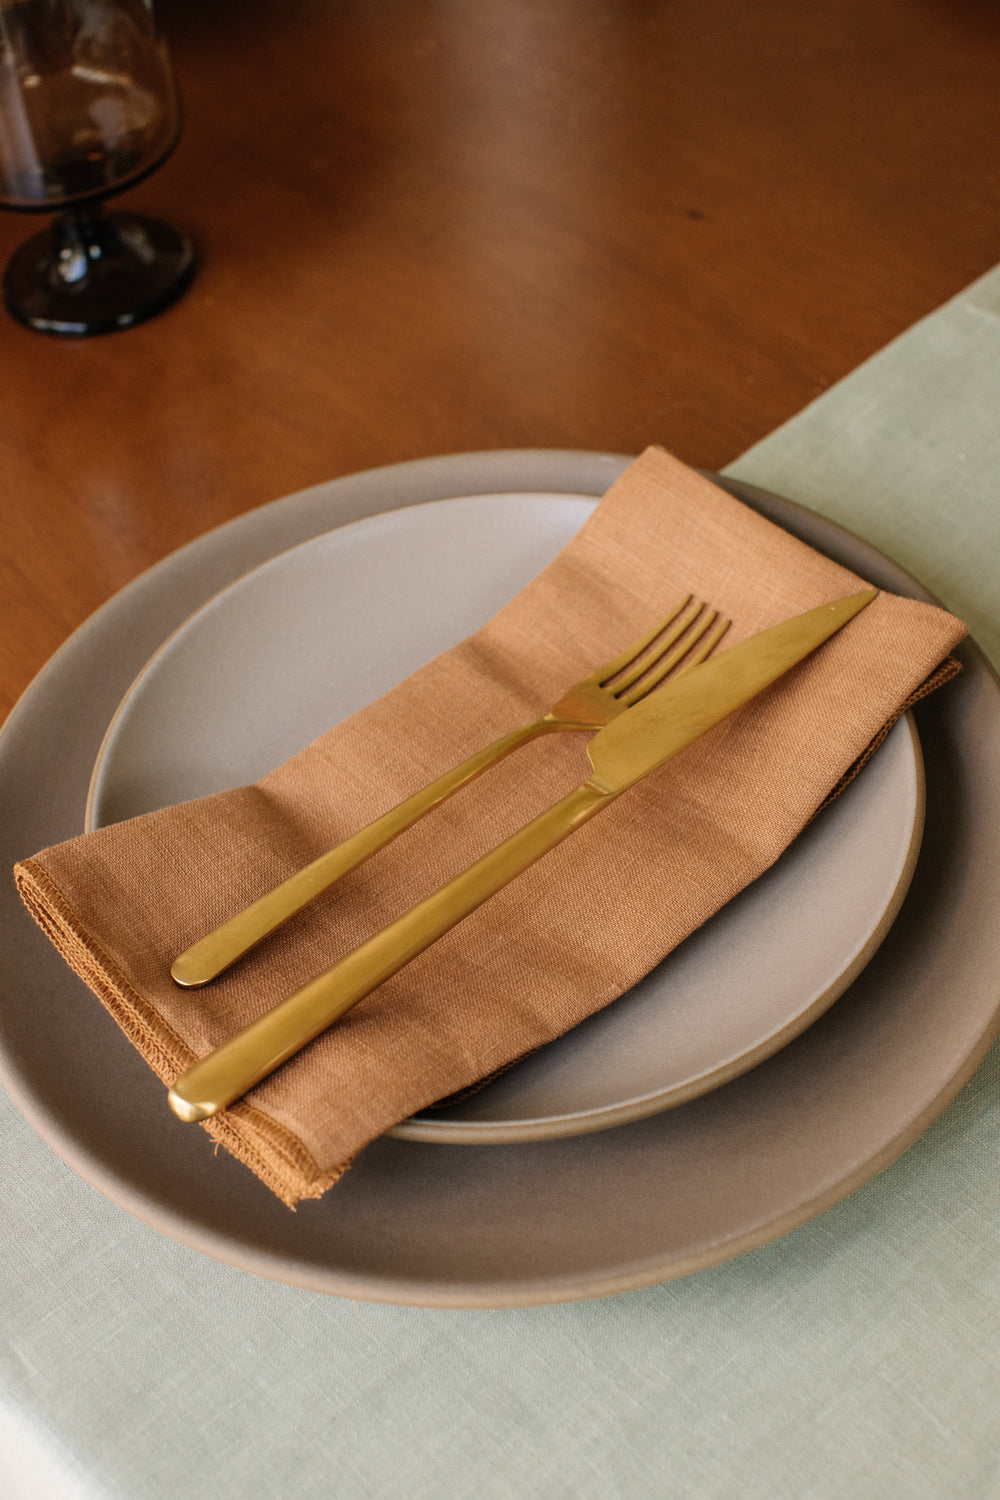 Napkins set of 4 in Tan Linen - Whimsy & Row